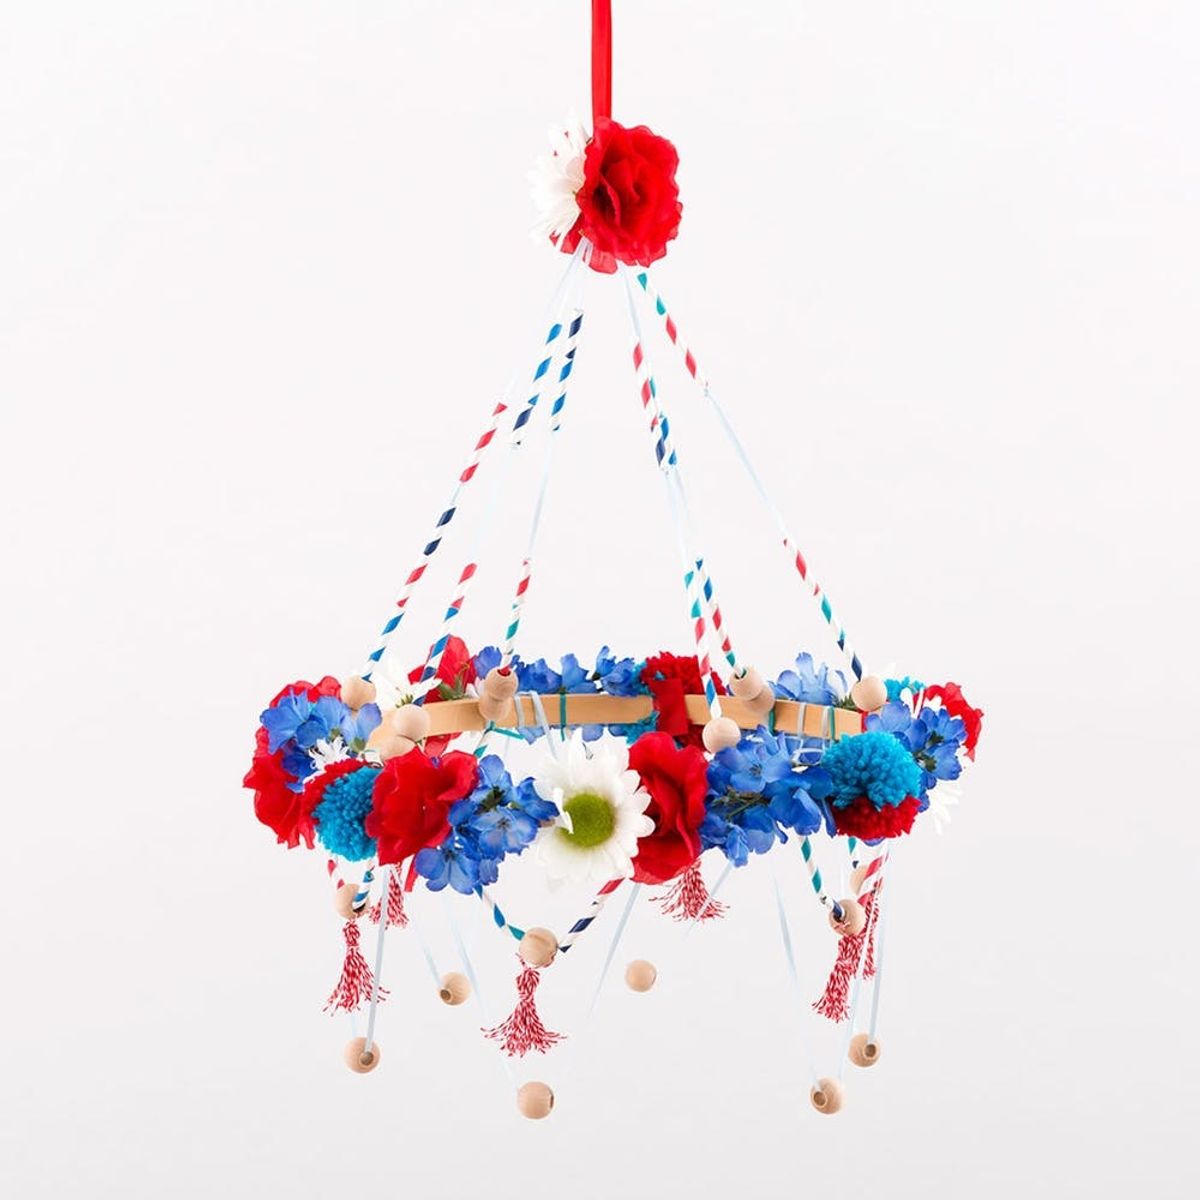 Raise Your 4th of July Spirit With This Crafty Chandelier